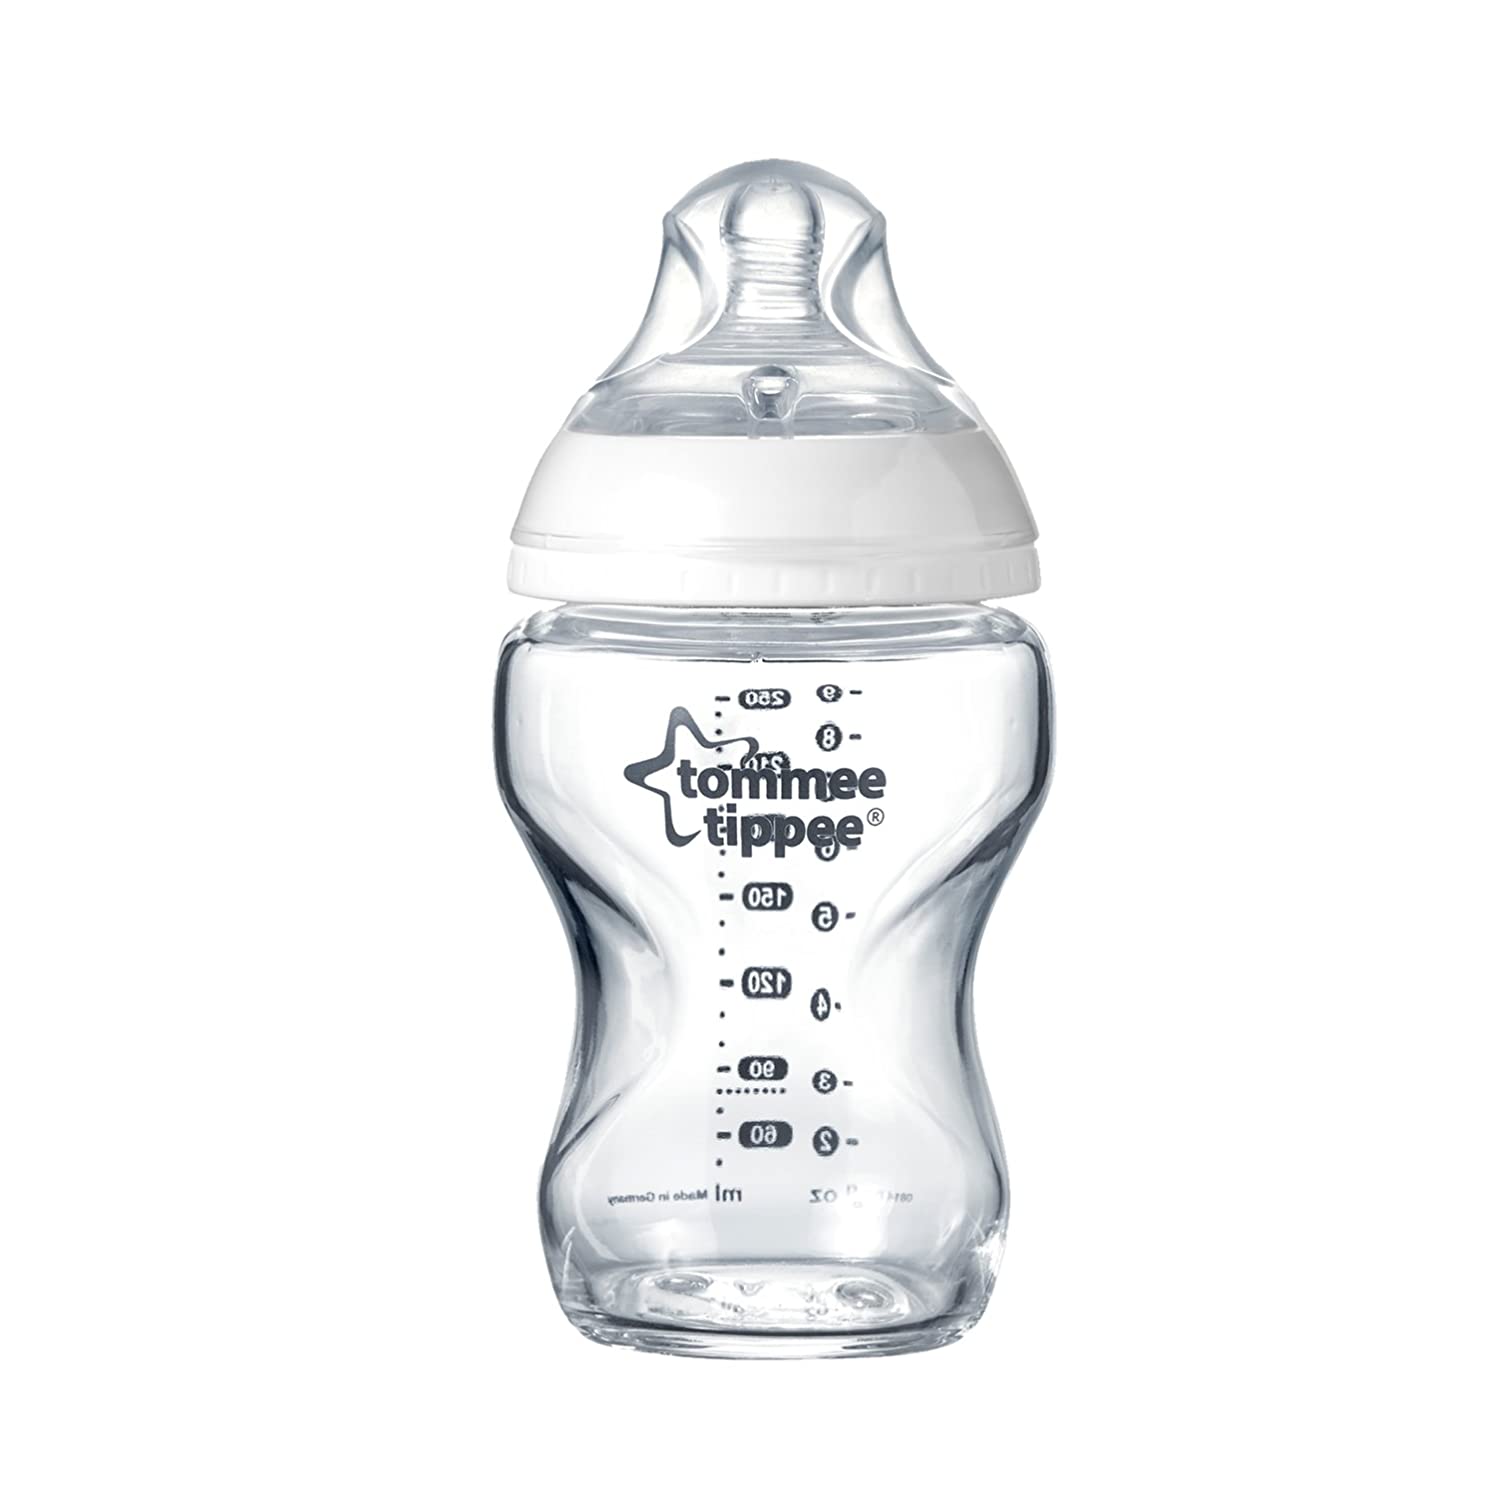 Tommee Tippee Glass Baby Bottle Anti-Colic Valve Soft Teat, 0+ Months, 250 ml